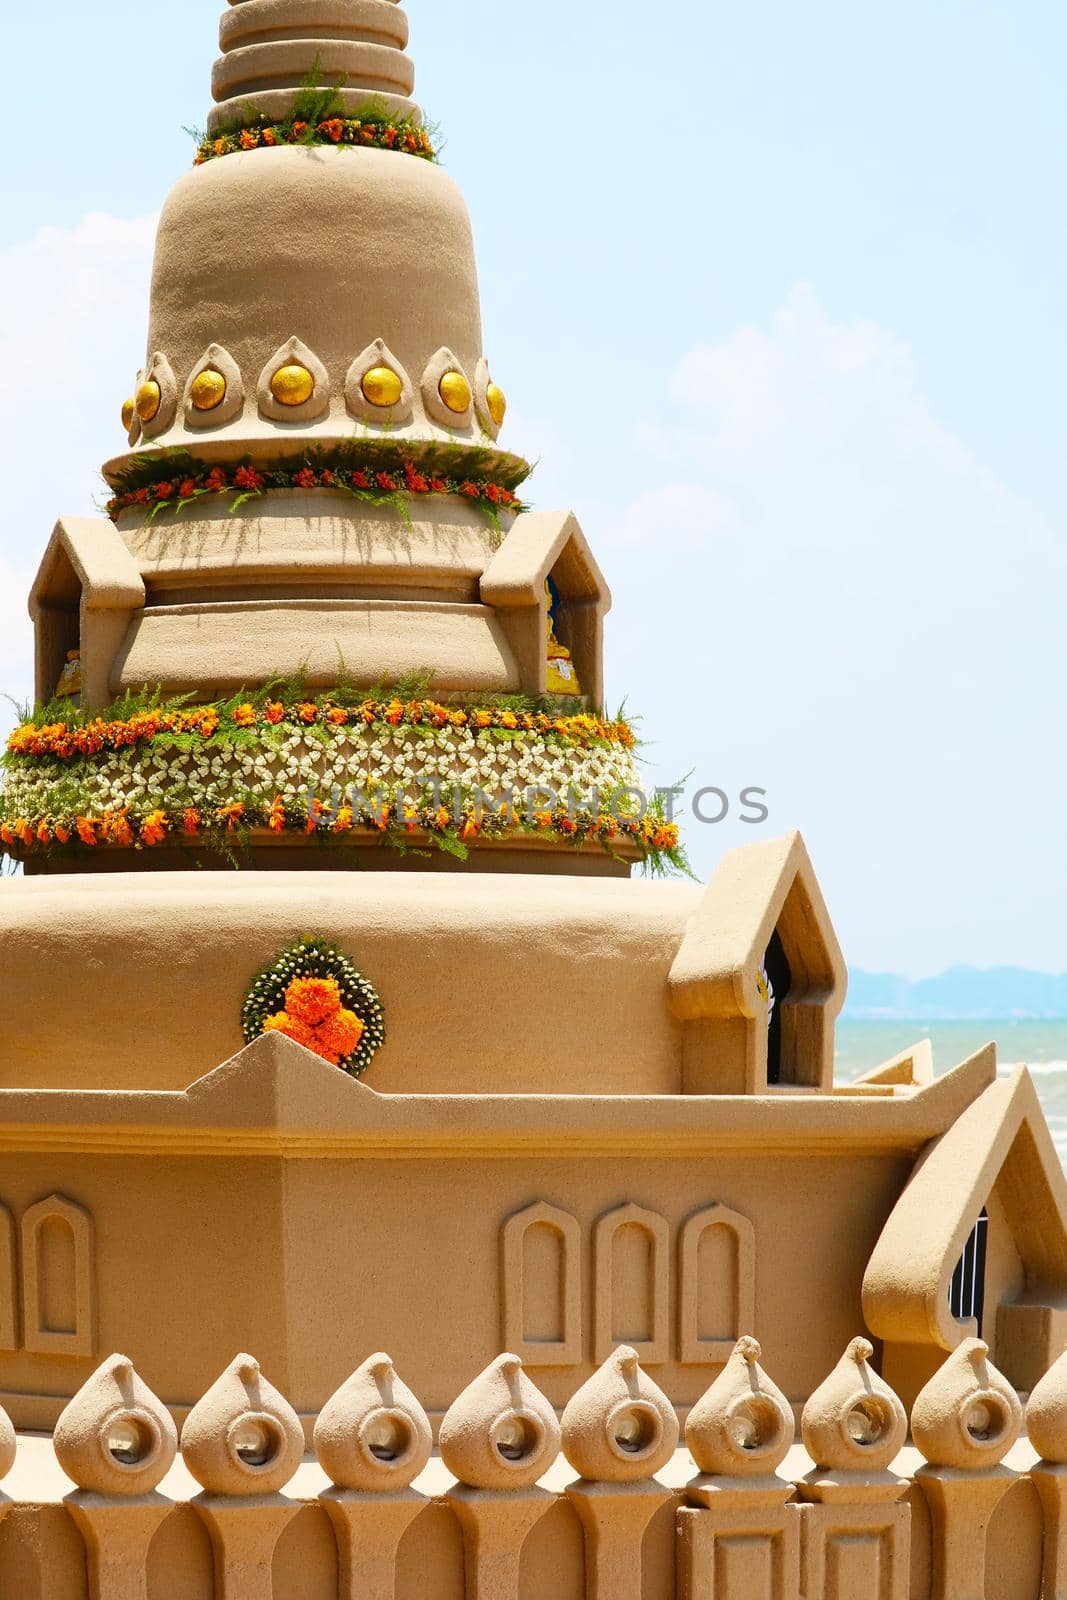 detail of window sand pagoda was carefully built, and beautifully decorated in Songkran festival by Darkfox